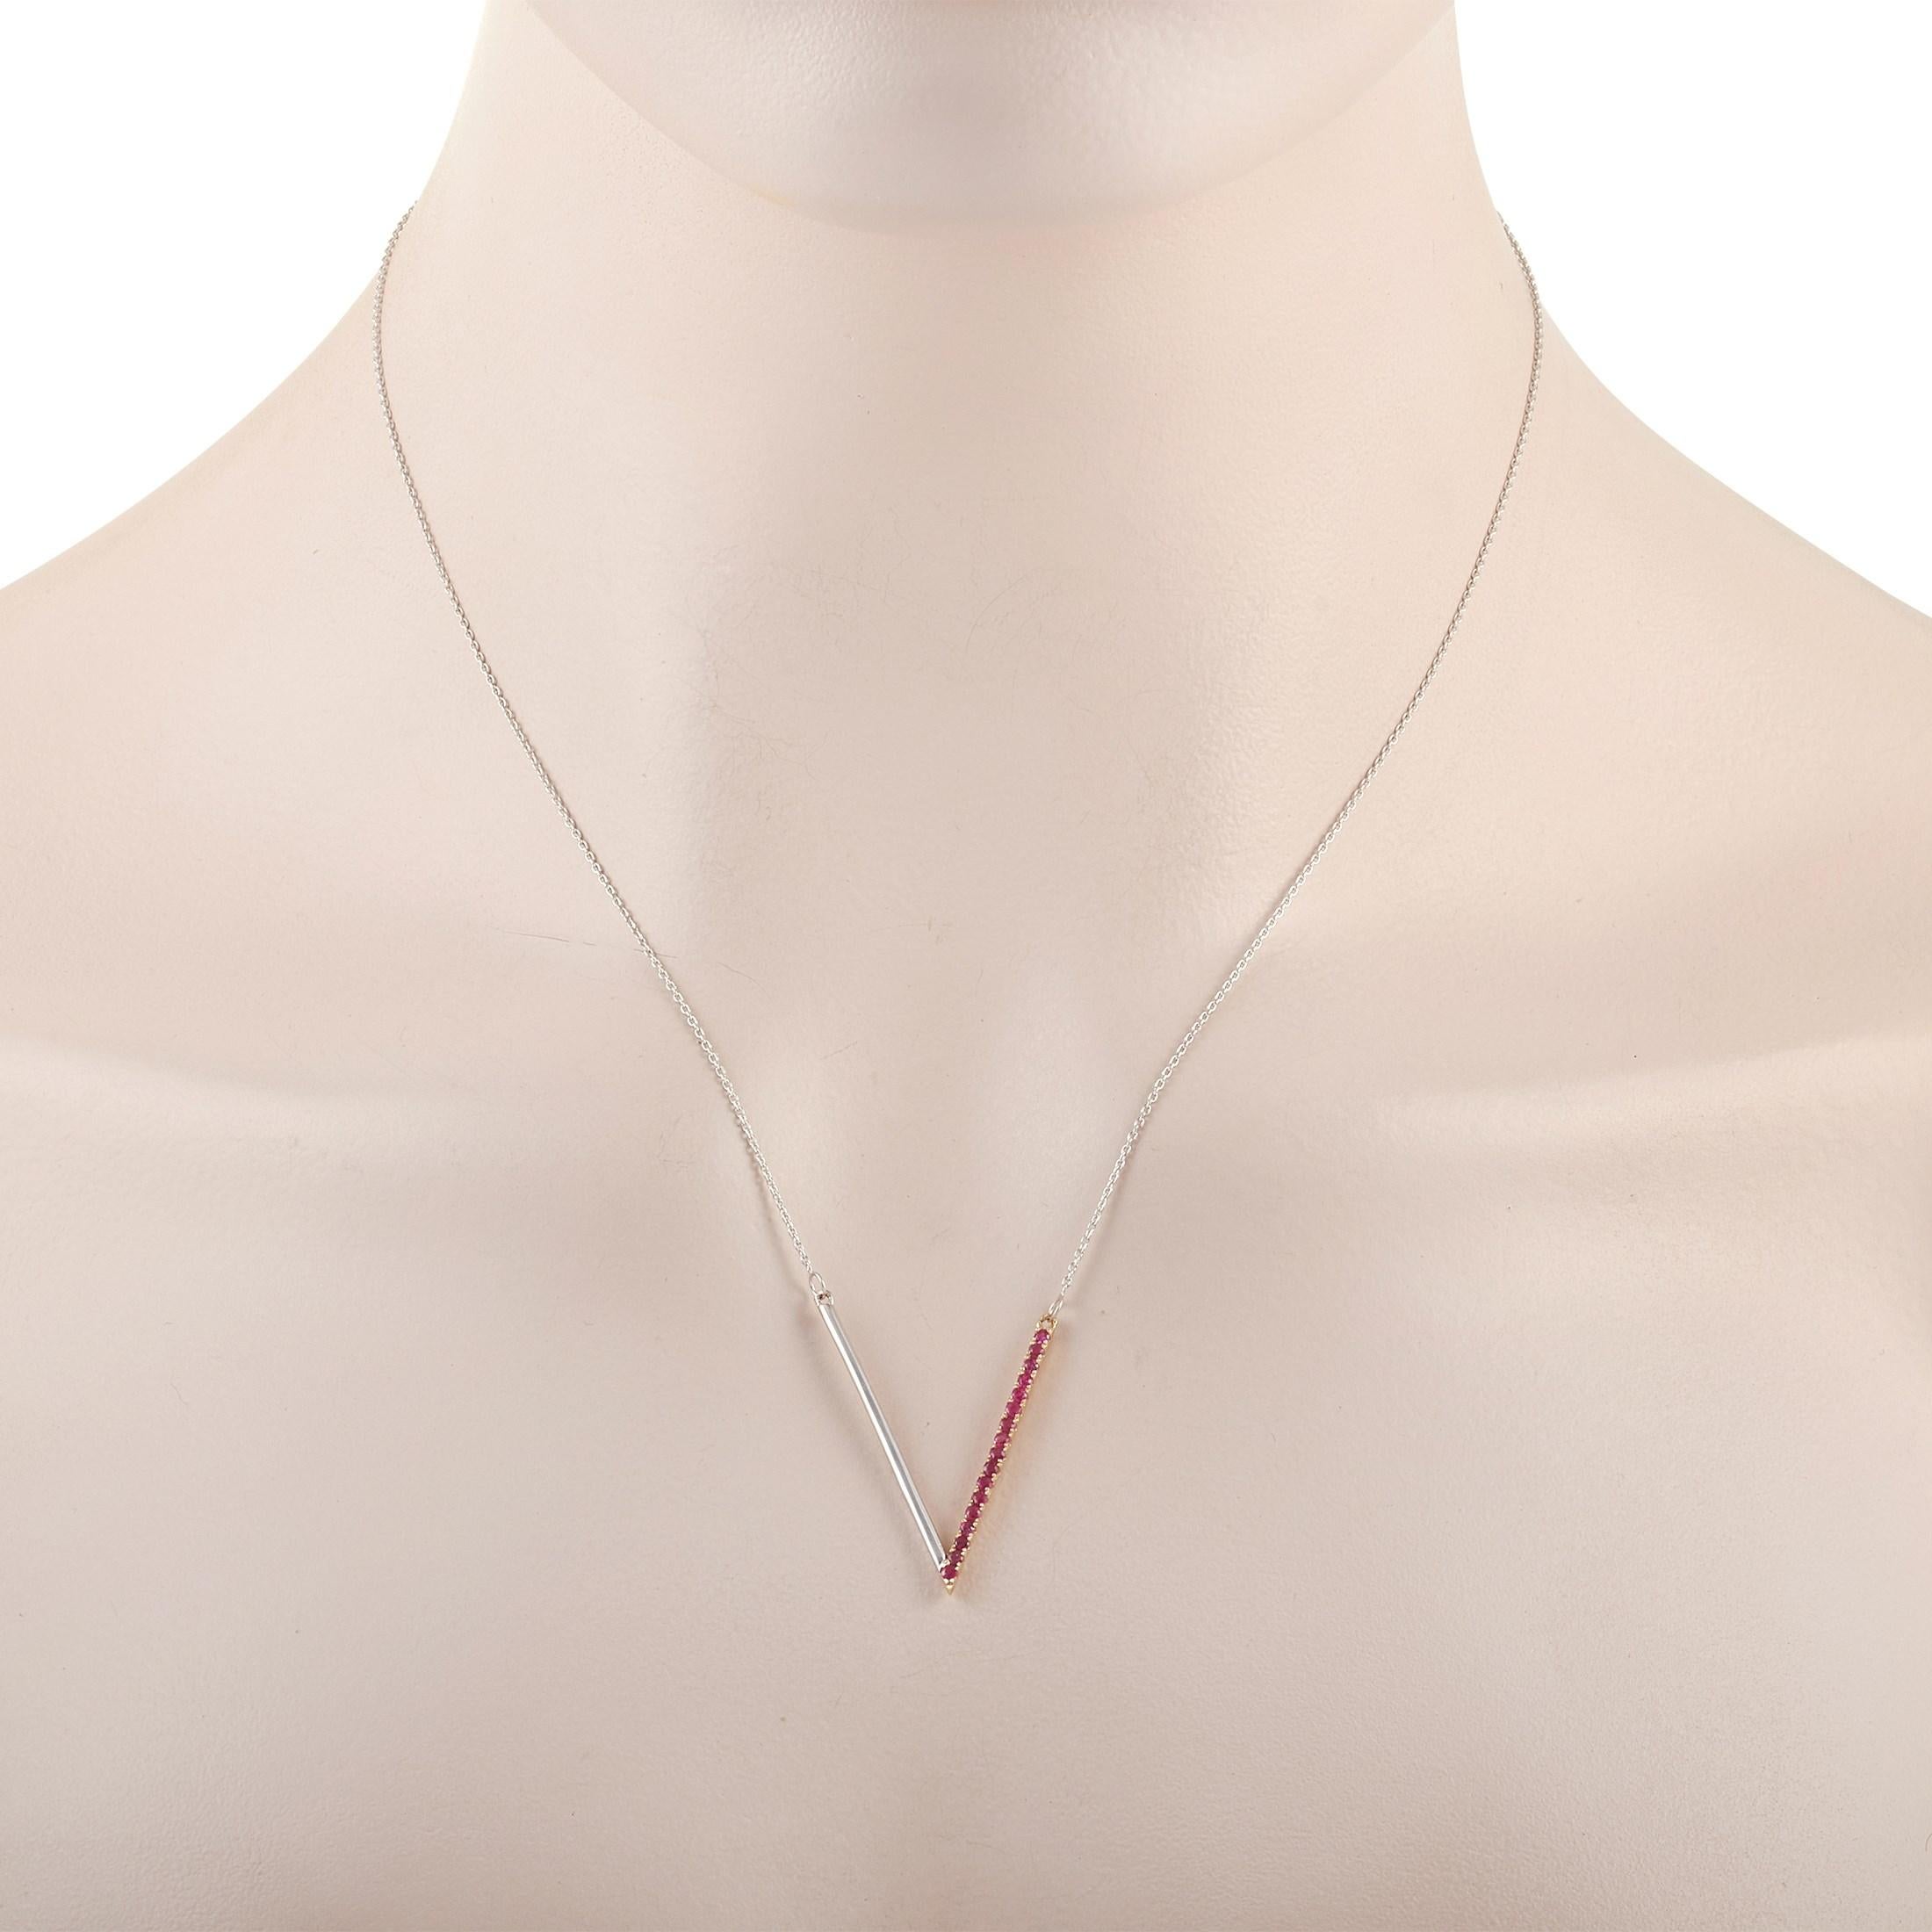 This LB Exclusive 14K White Gold 0.29 ct Ruby Necklace features a delicate 14K White Gold chain measuring 16 inches in length. The necklace features a matching 14K White Gold V-shaped Pendant set with 0.29 carats of round-cut rubies along one side.